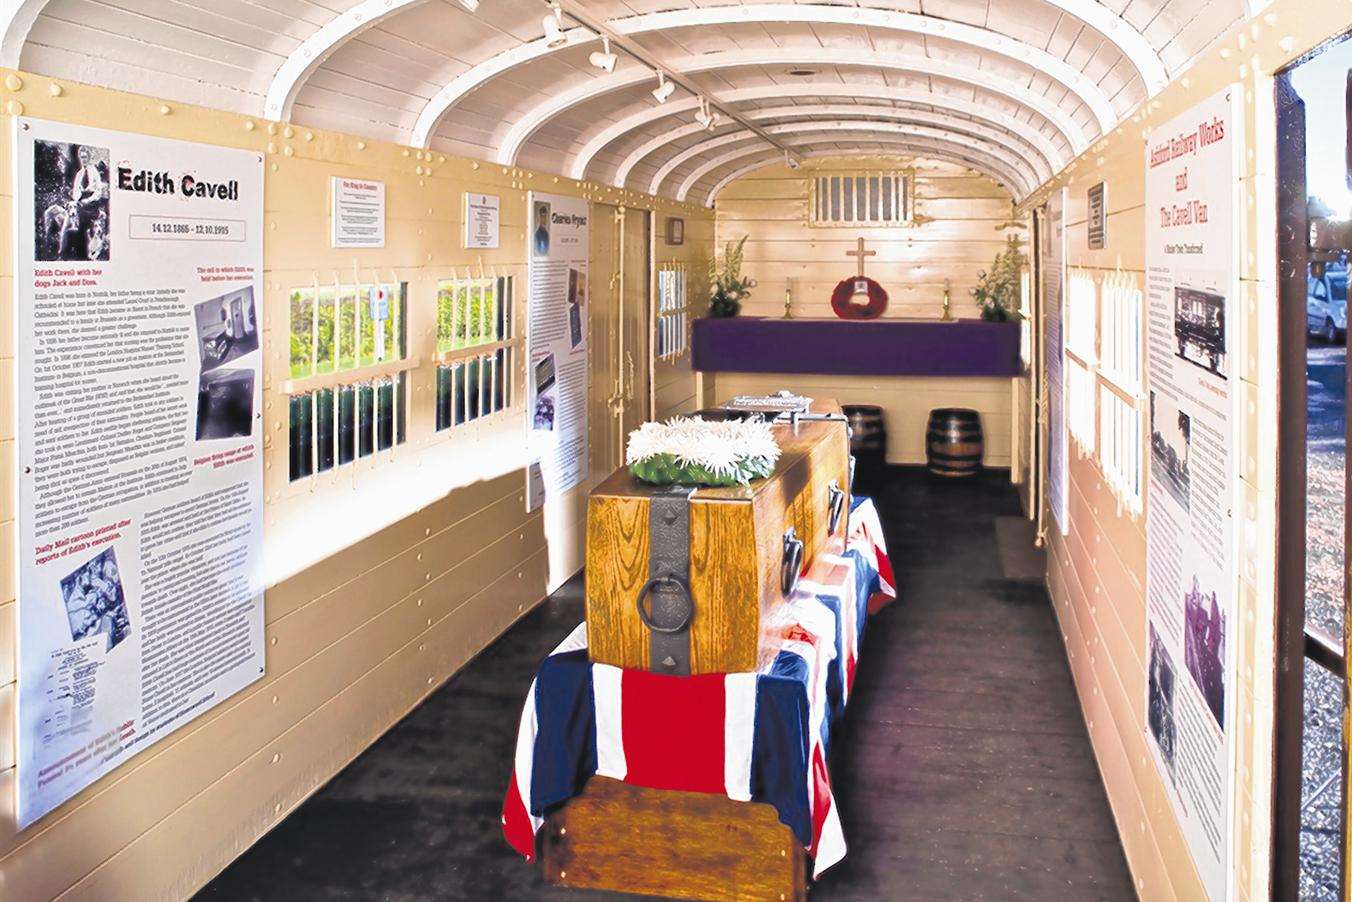 The Cavell Van at Bodiam station which carried the remains of three heroes repatriated from Europe in the First World War